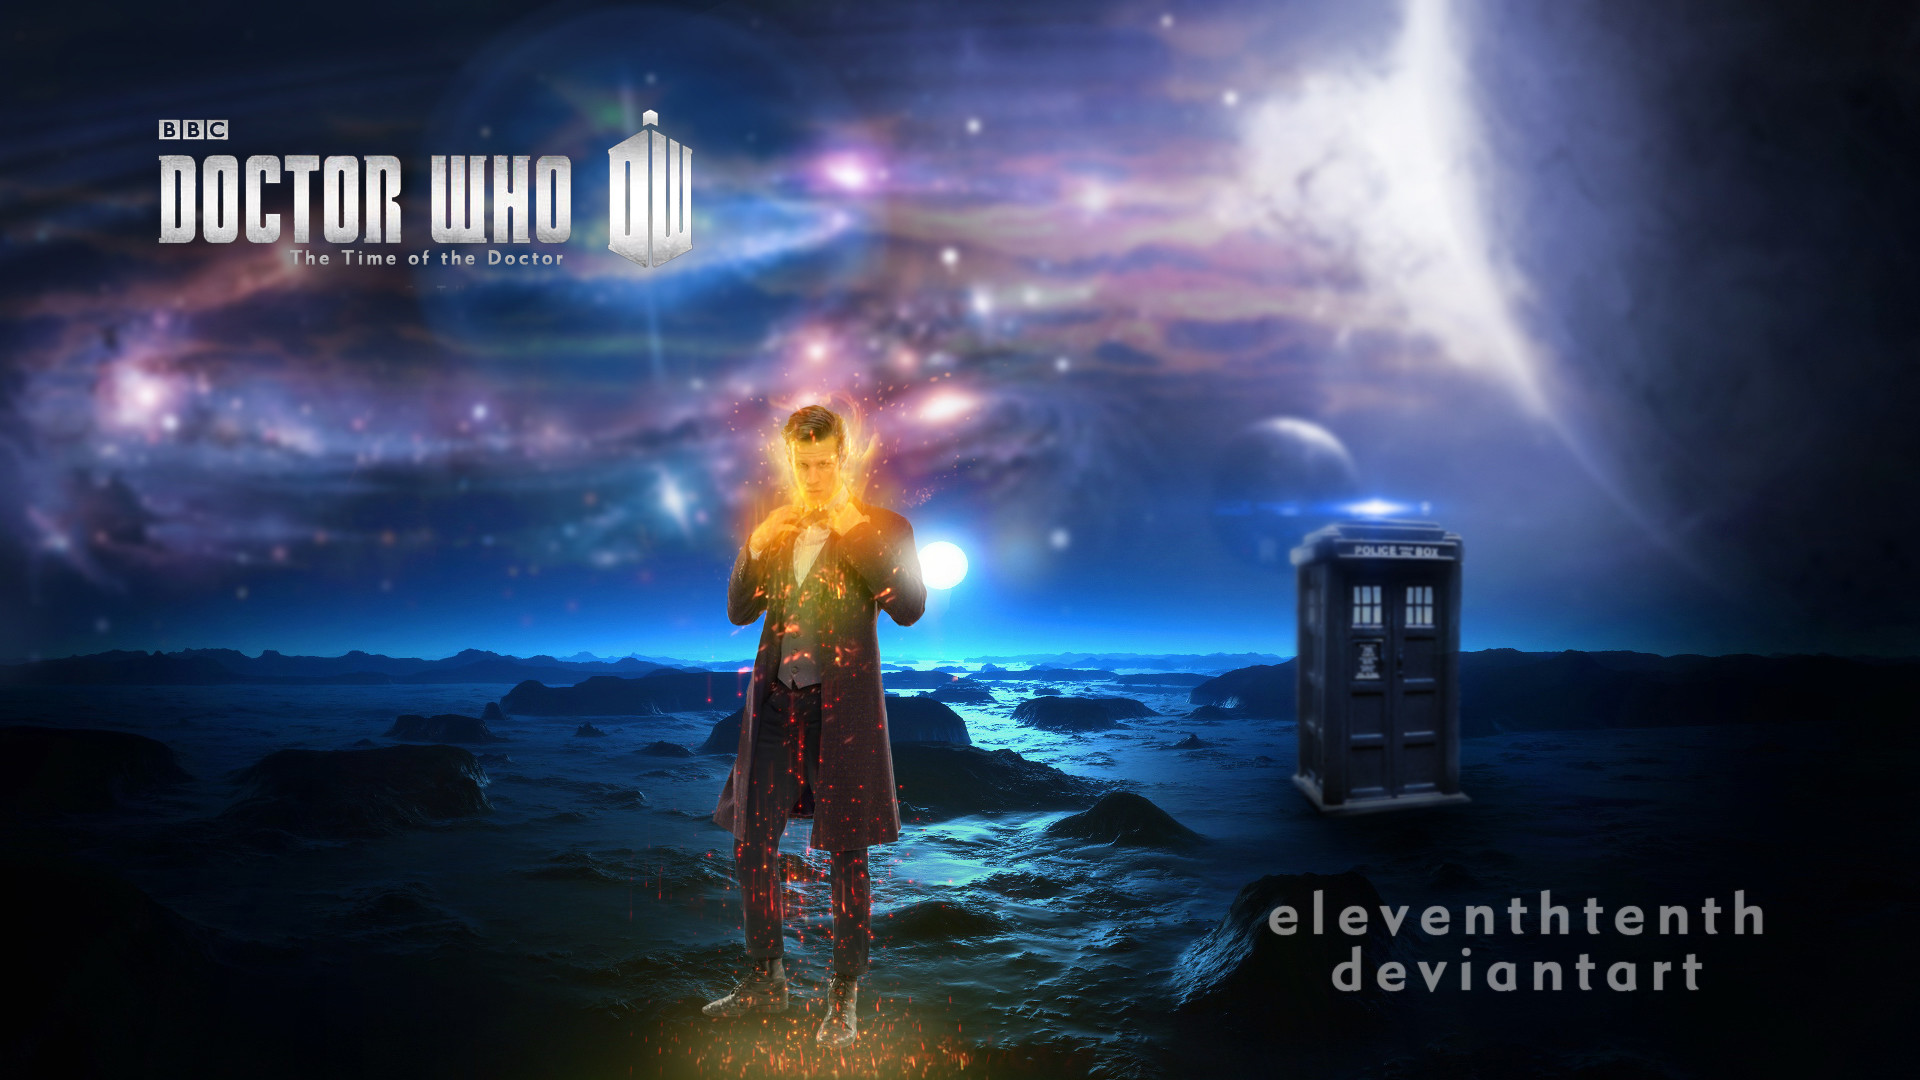 The Doctor And Amy Pond Doctor Who Wallpaper Doctor Who Wallpapers Matt  Smith Wallpapers)